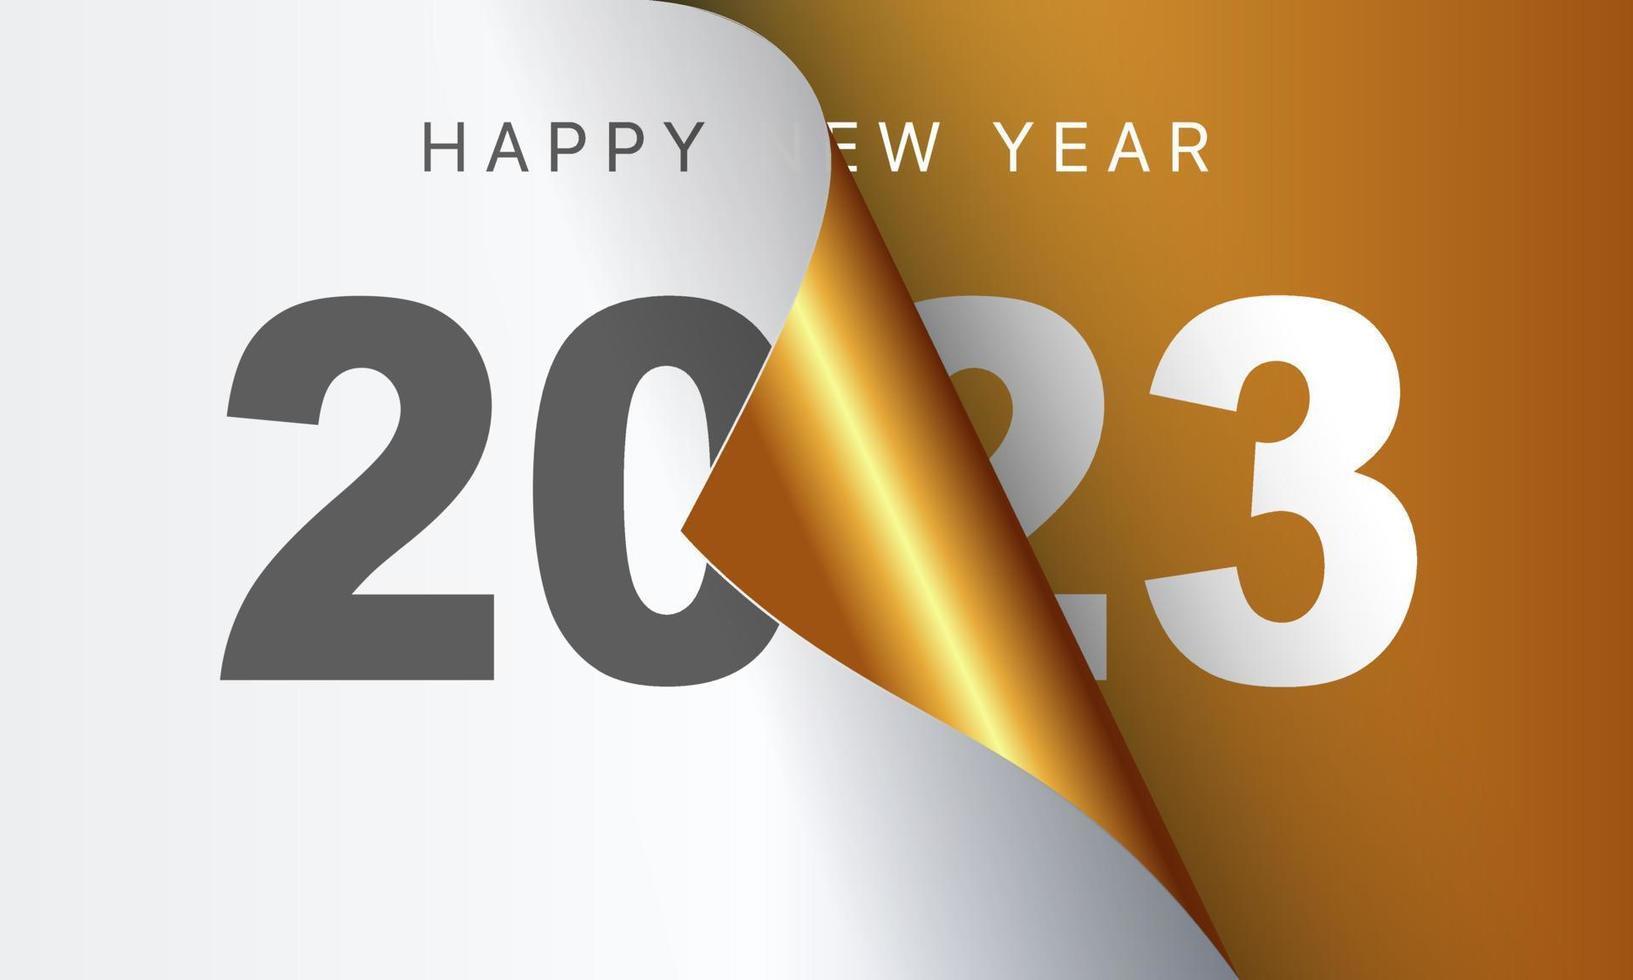 Happy New Year 2023 greeting card design template. End of 2022 and  beginning of 2023. The